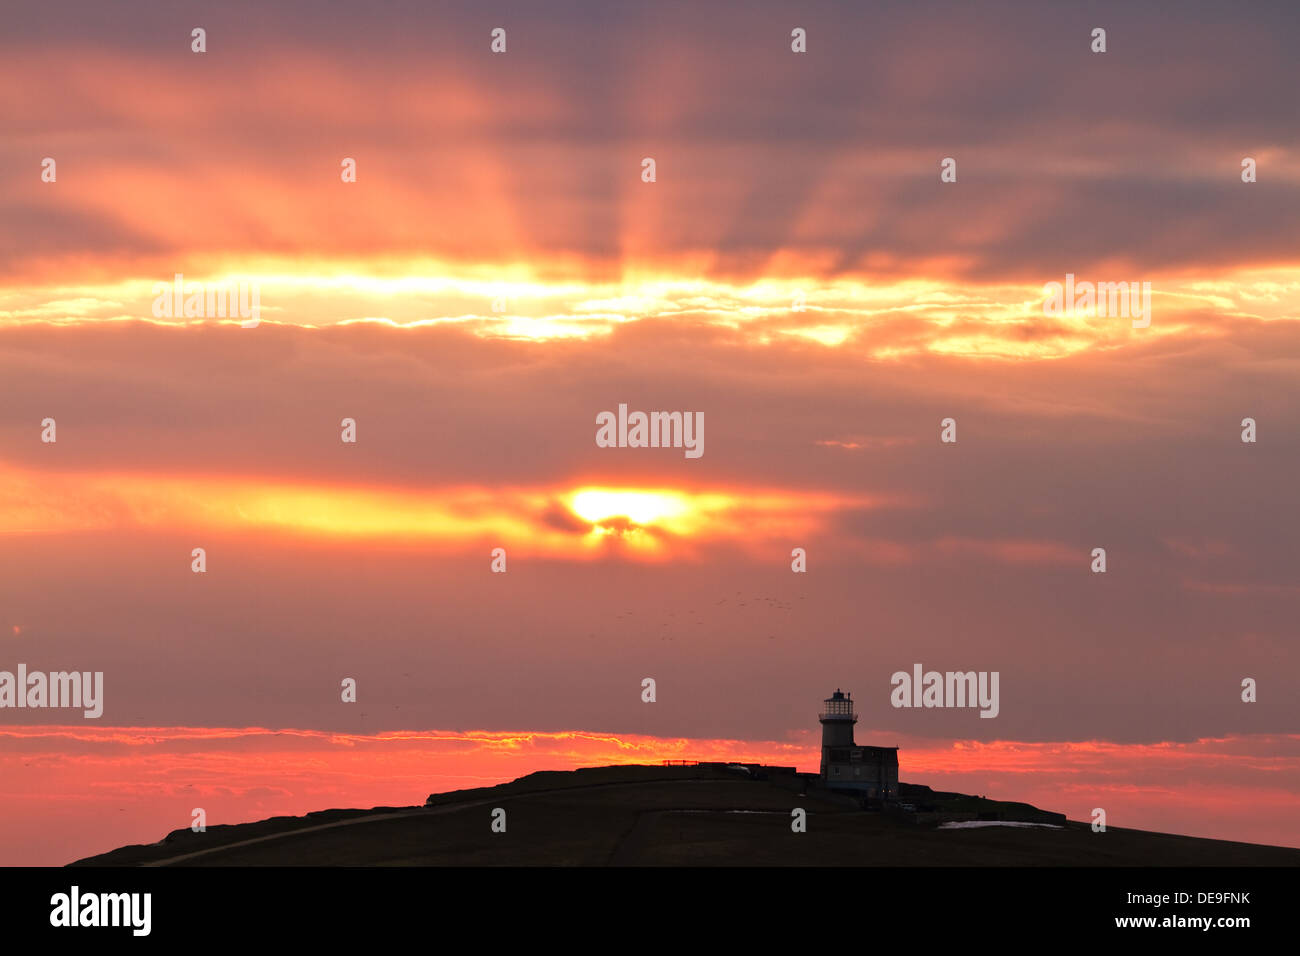 The Belle Tout Lighthouse, East Sussex, Beachy head during sunset Stock Photo